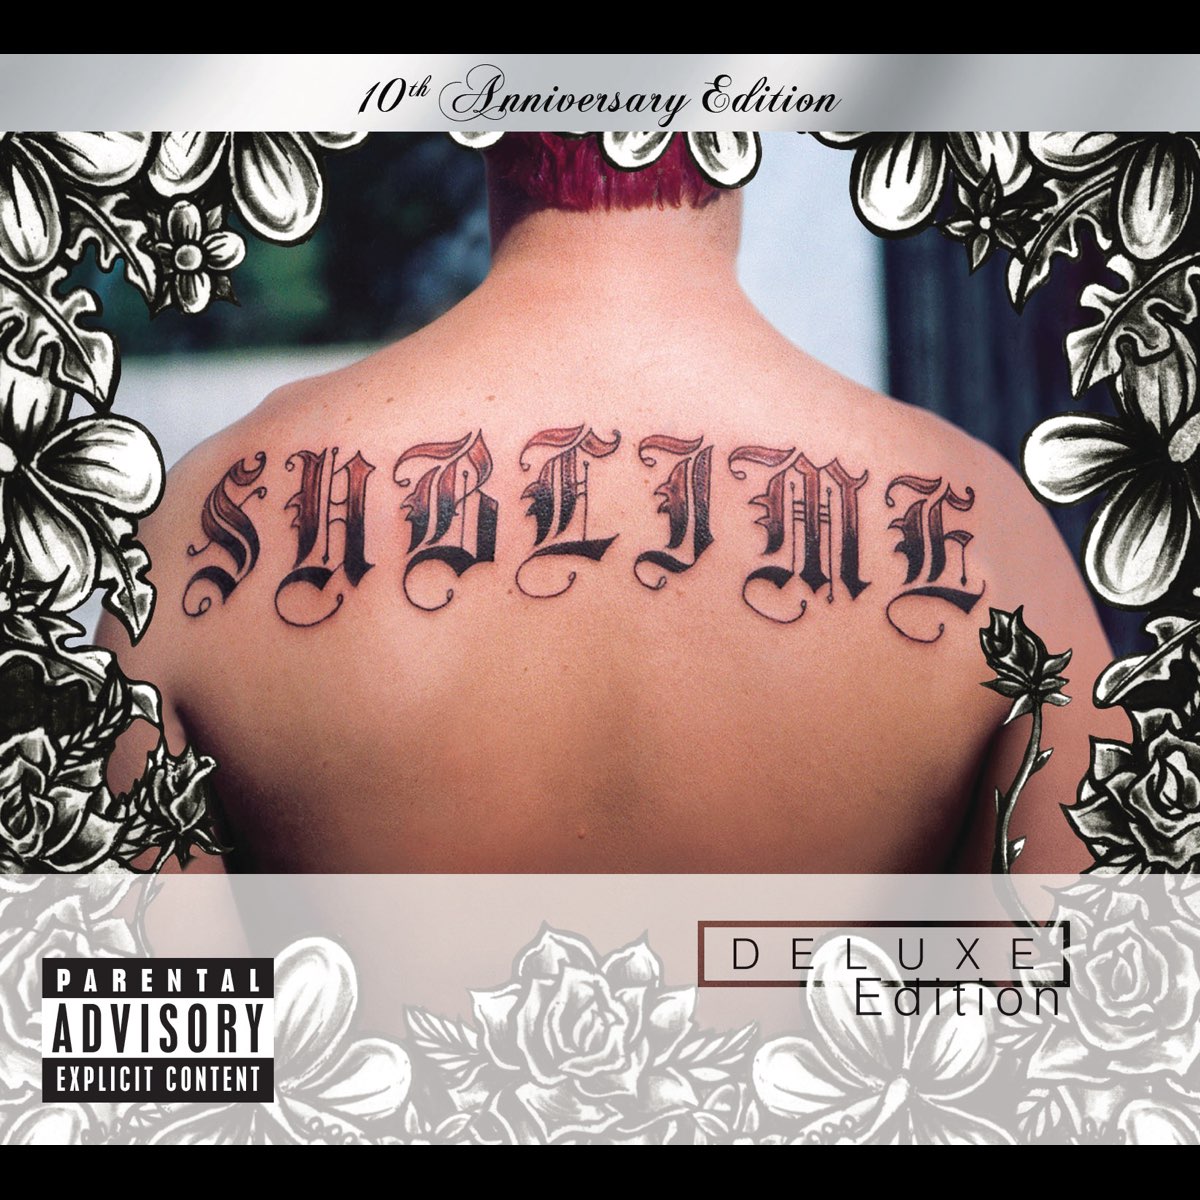 Sublime (10th Anniversary Edition / Deluxe Edition) / Sublime